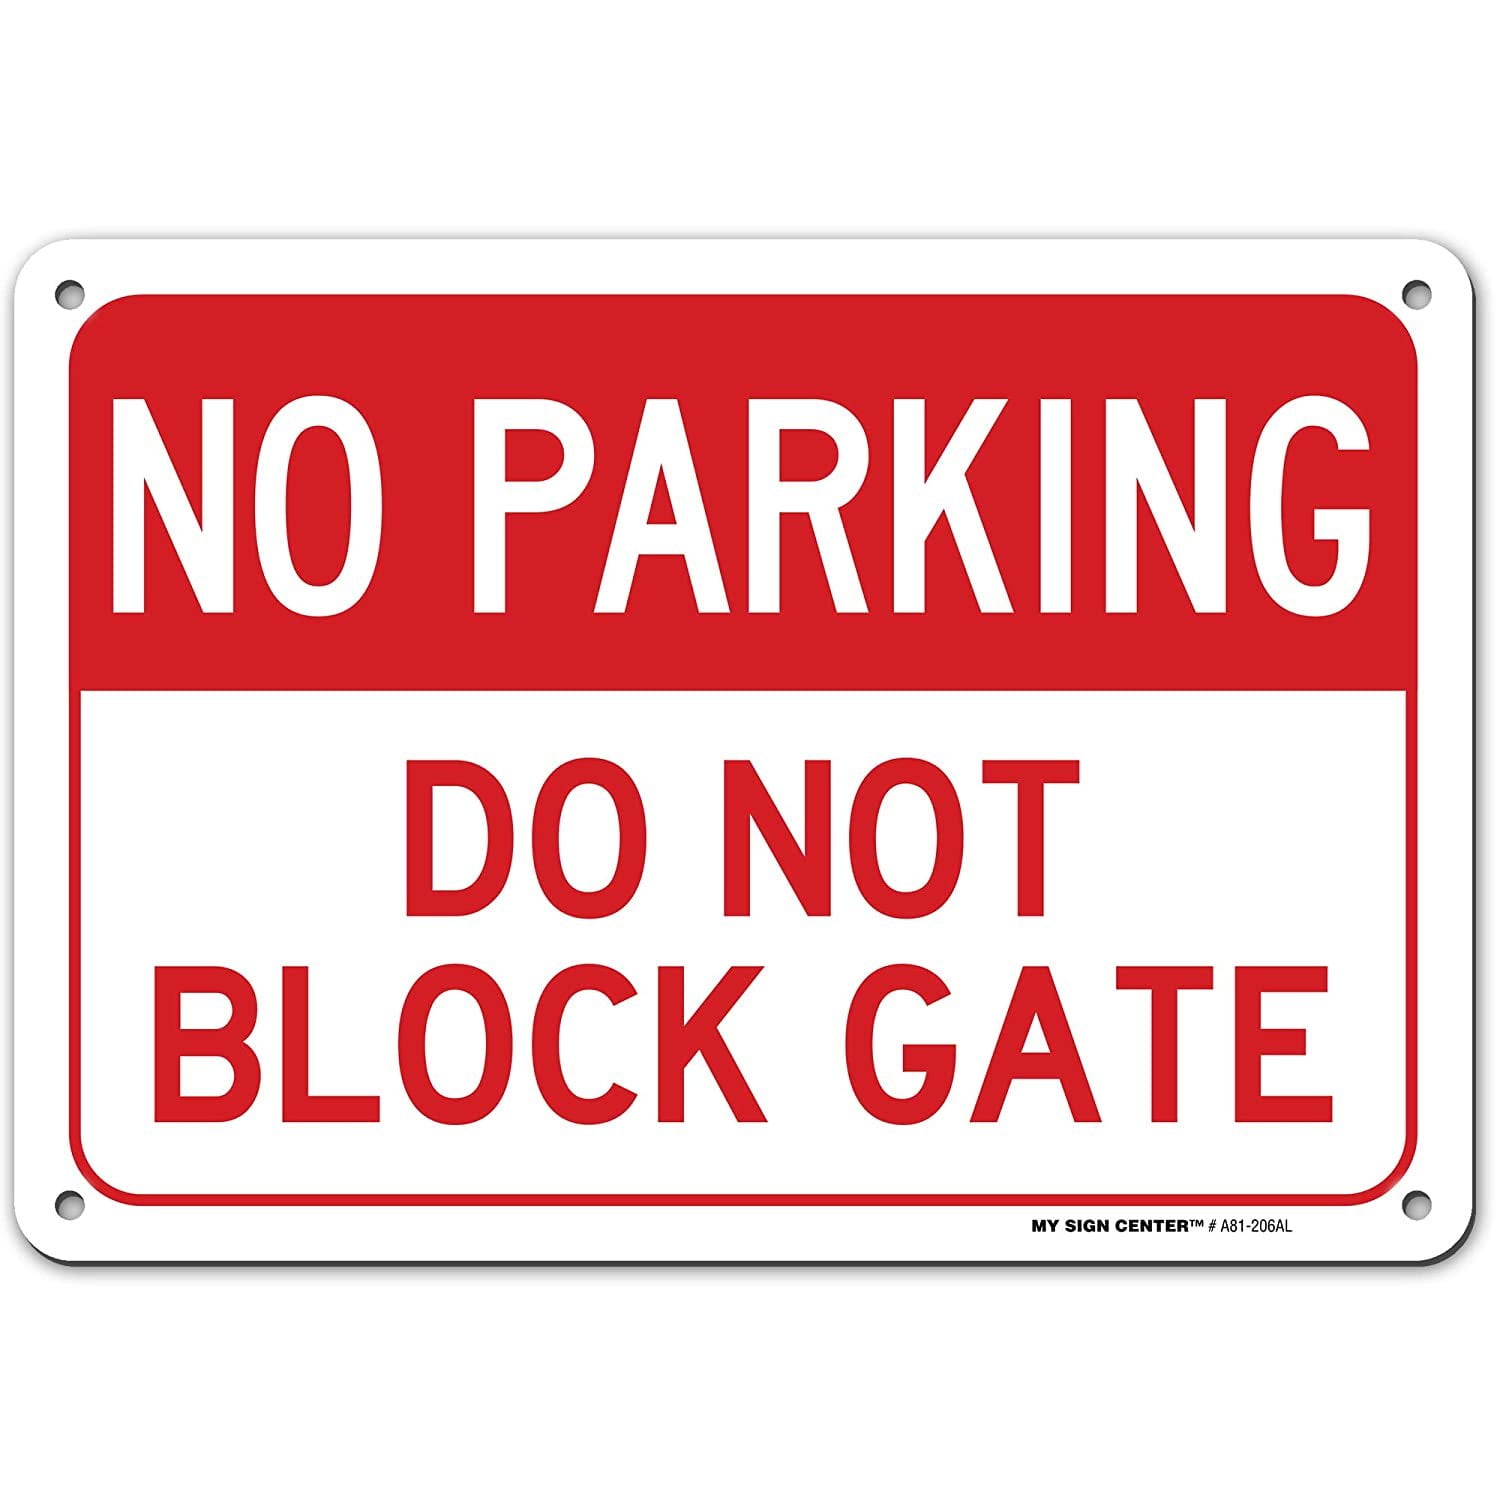 Made in The USA 18 X 24 Heavy-Gauge Aluminum Rust Proof Parking Sign Protect Your Business & Municipality Stop Do Not Block Gate